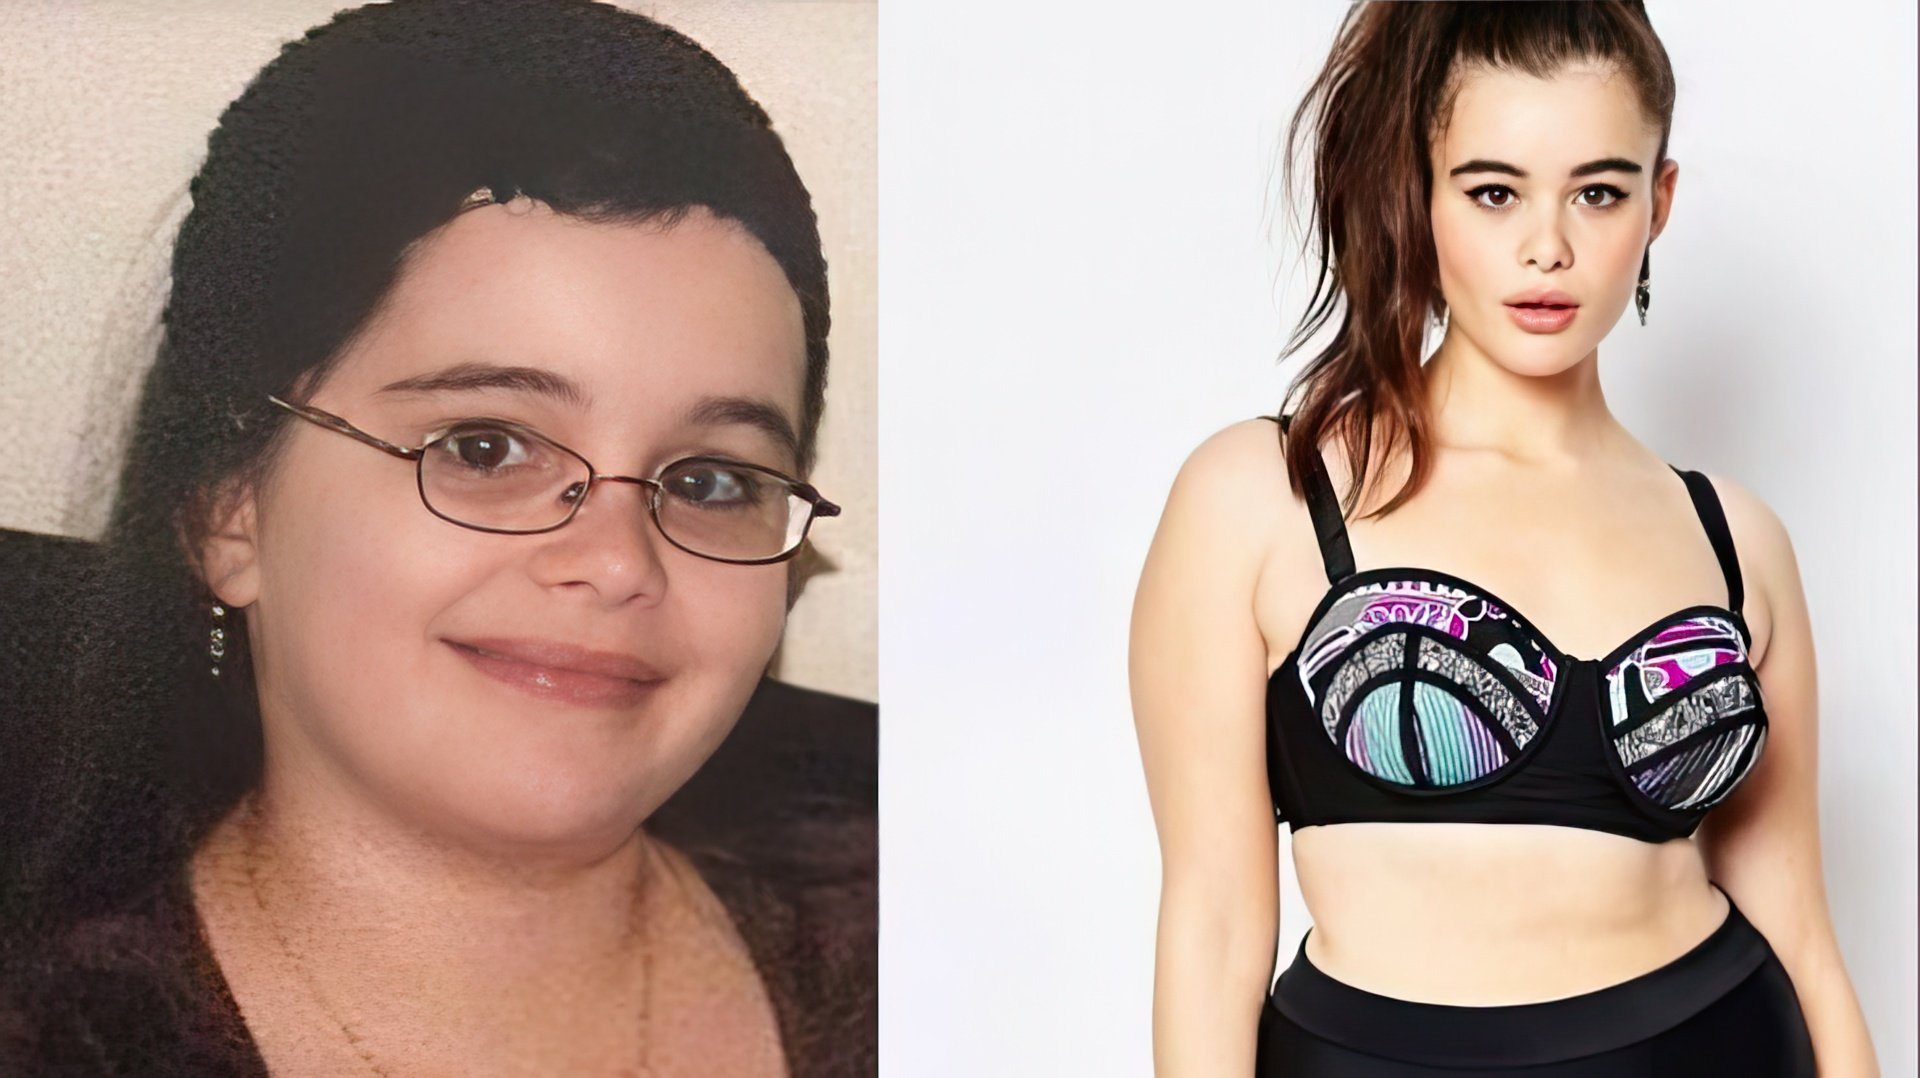 Barbie Ferreira in her youth and now